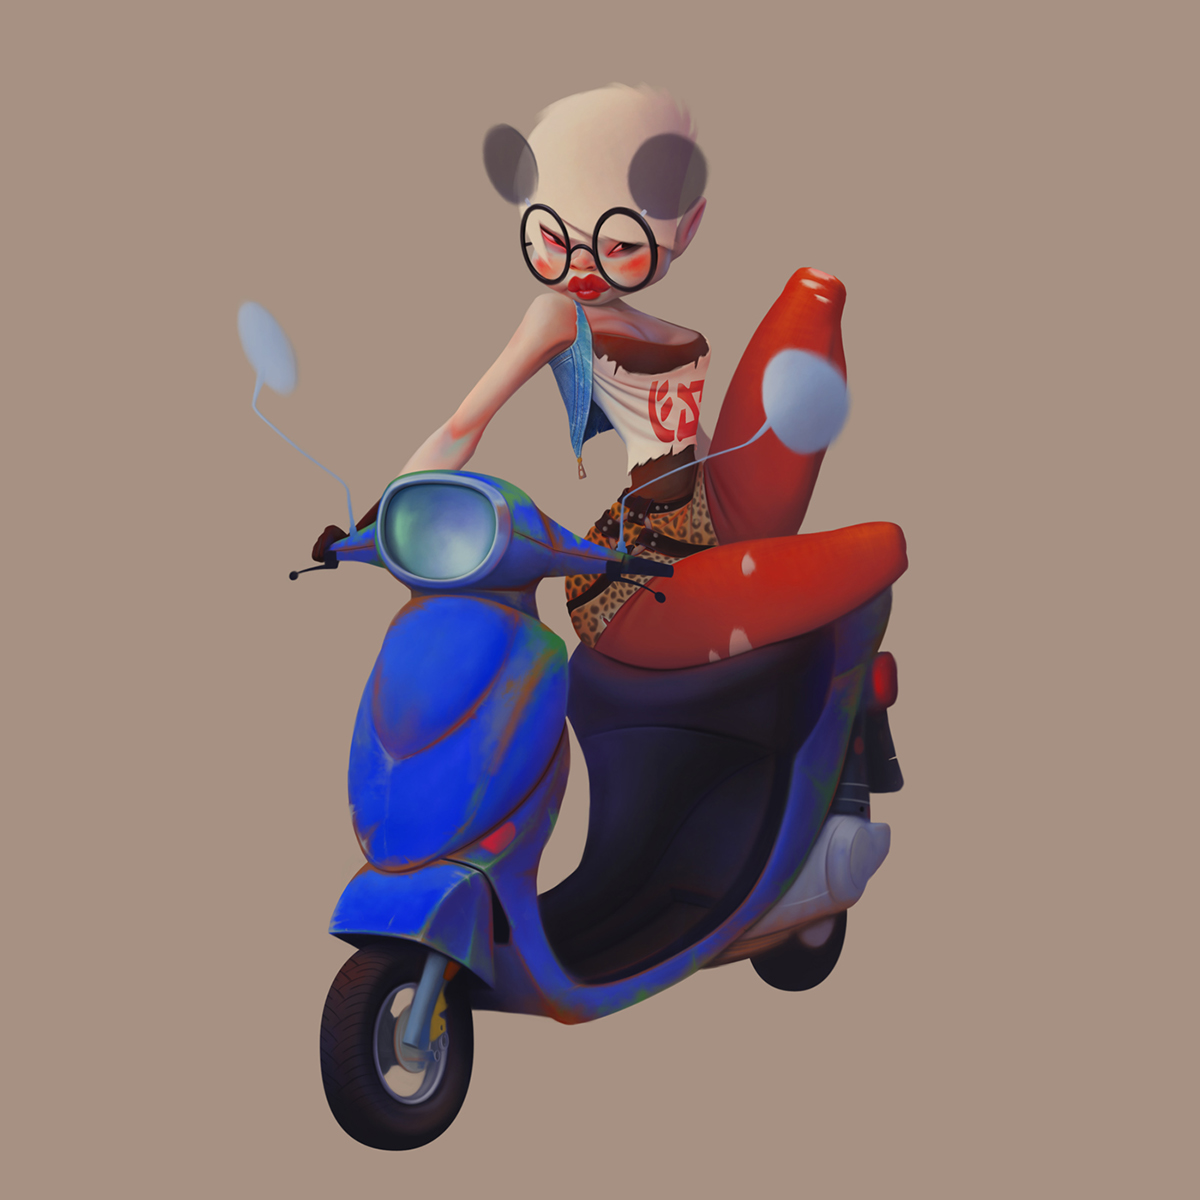 scooter character design by dmitry dmitriev